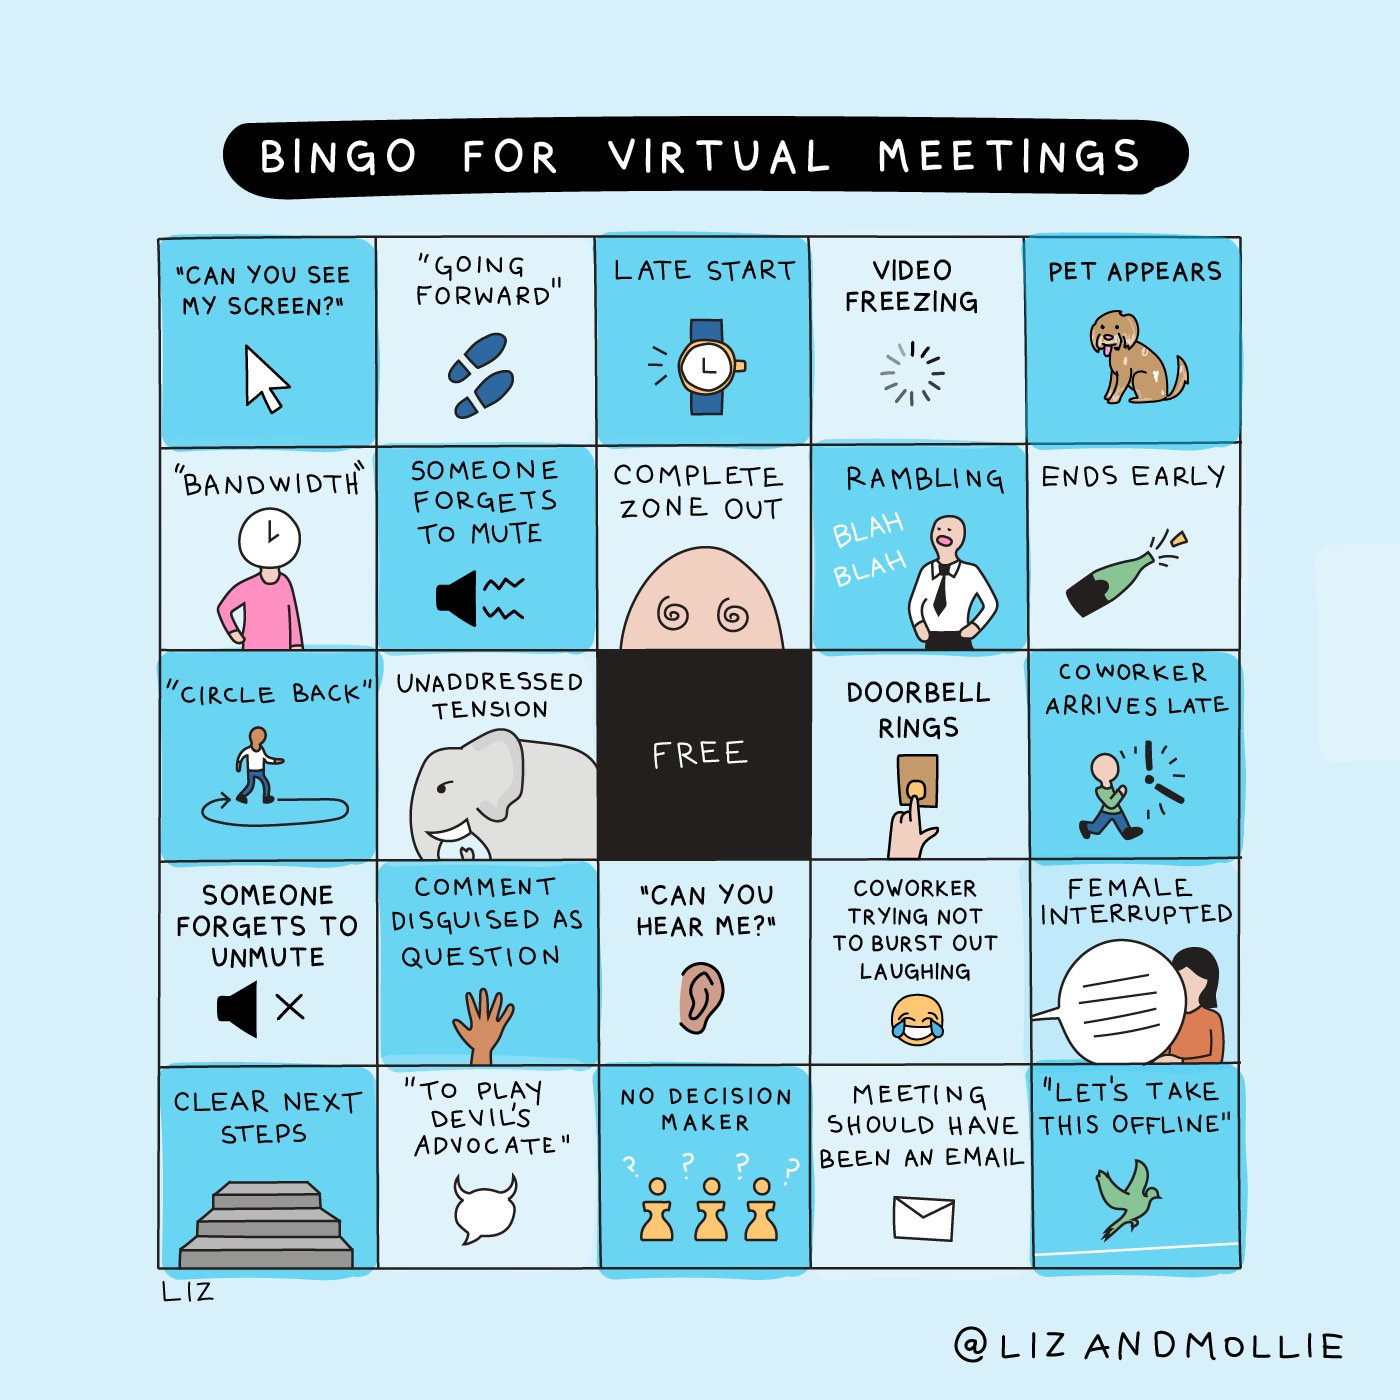 Illustration of a Bingo board for virtual meetings. Includes, "Can you see my screen," "Going forward," late start, video freezing, pet appears, "Bandwidth," someone forgets to mute, complete zone out, rambling, ends early, "Circle back," unaddressed tension, doorbell rings, coworker arrives late, someone forgets to unmute, comment disguised as question, "Can you hear me?," coworker trying not to laugh, female interrupted, clear next steps, "To play devil's advocate," no decision maker, meeting should have been an email, "Let's take this offline."